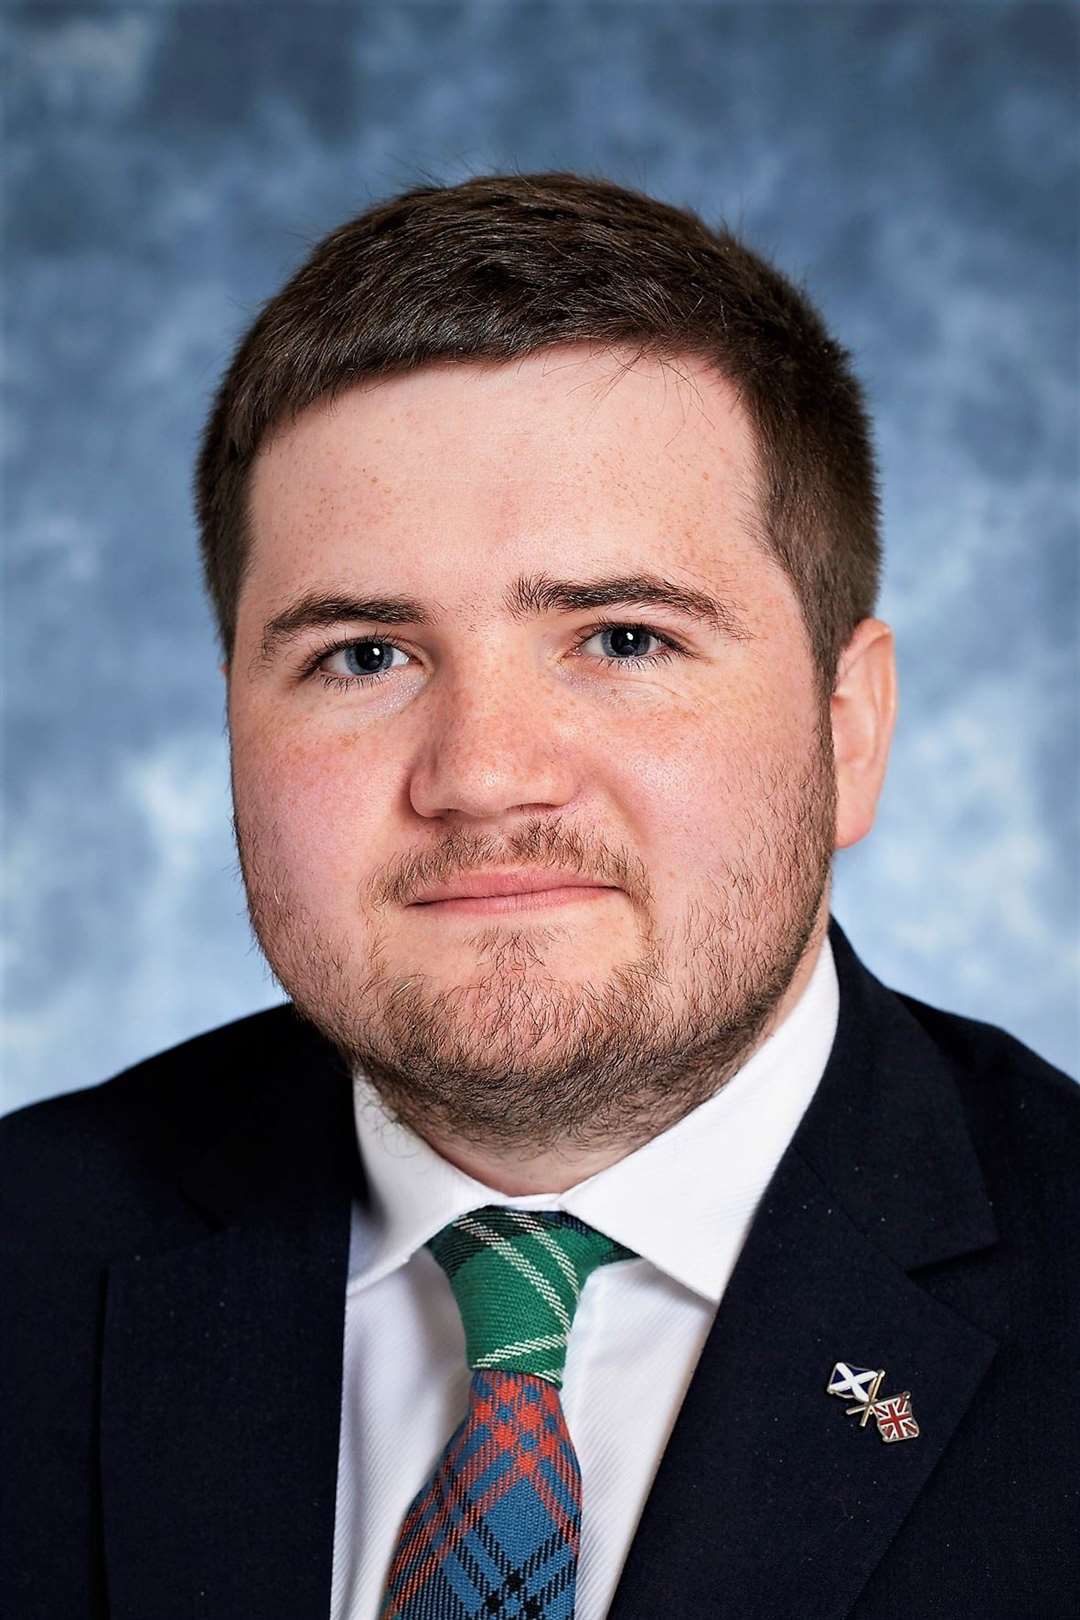 Conservative councillor Struan Mackie says he has noticed a rise in the severity of online abuse.